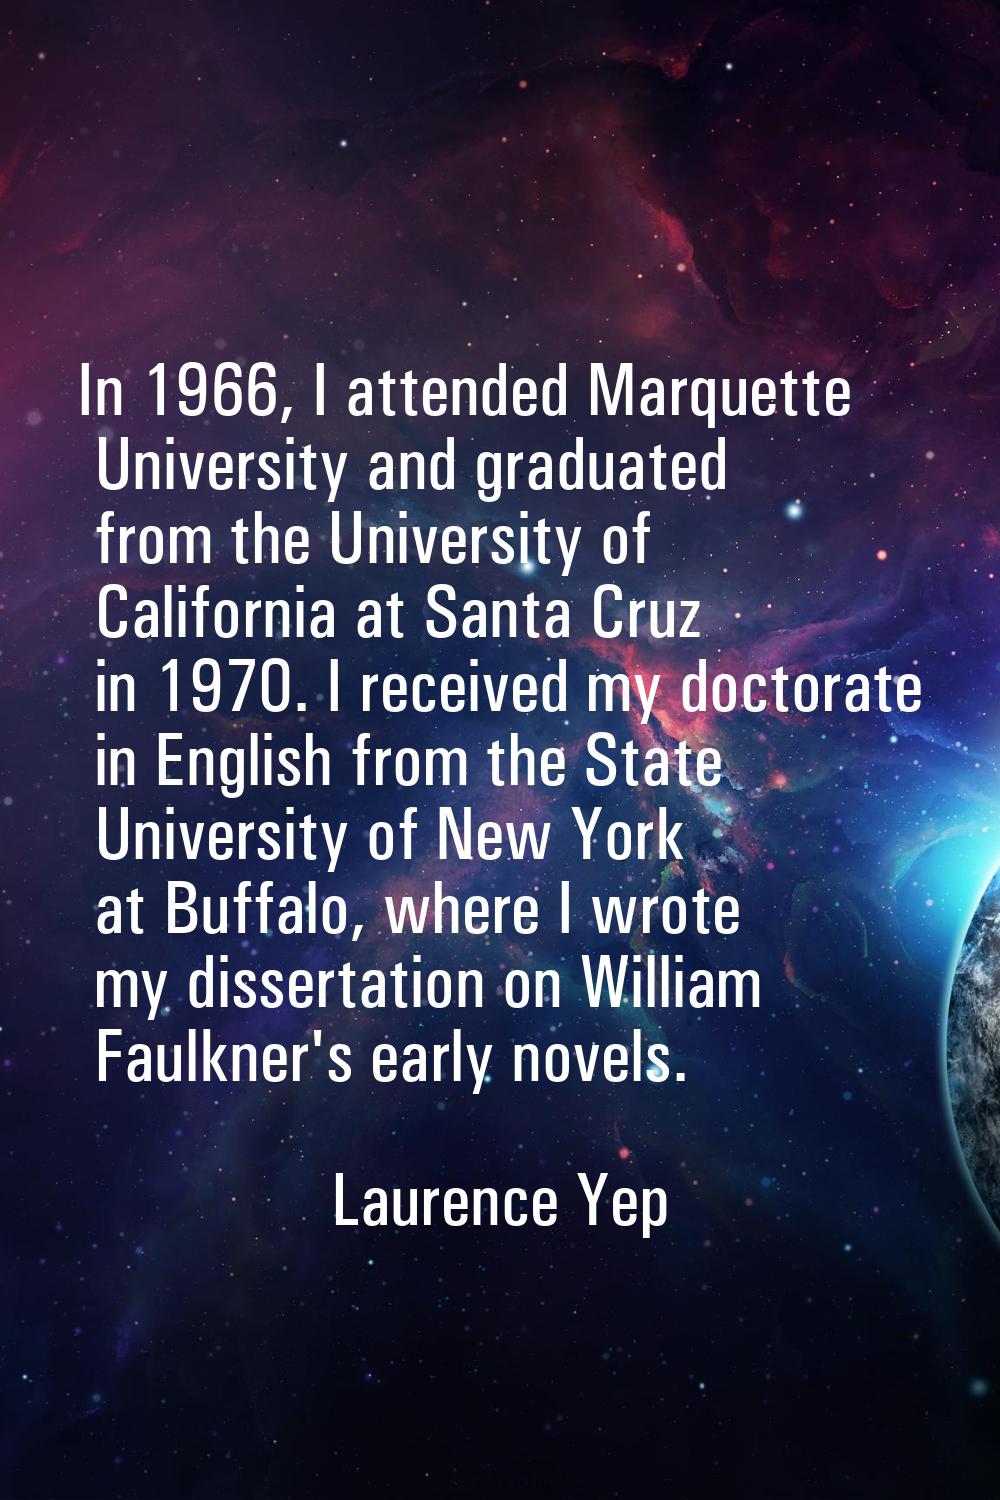 In 1966, I attended Marquette University and graduated from the University of California at Santa C